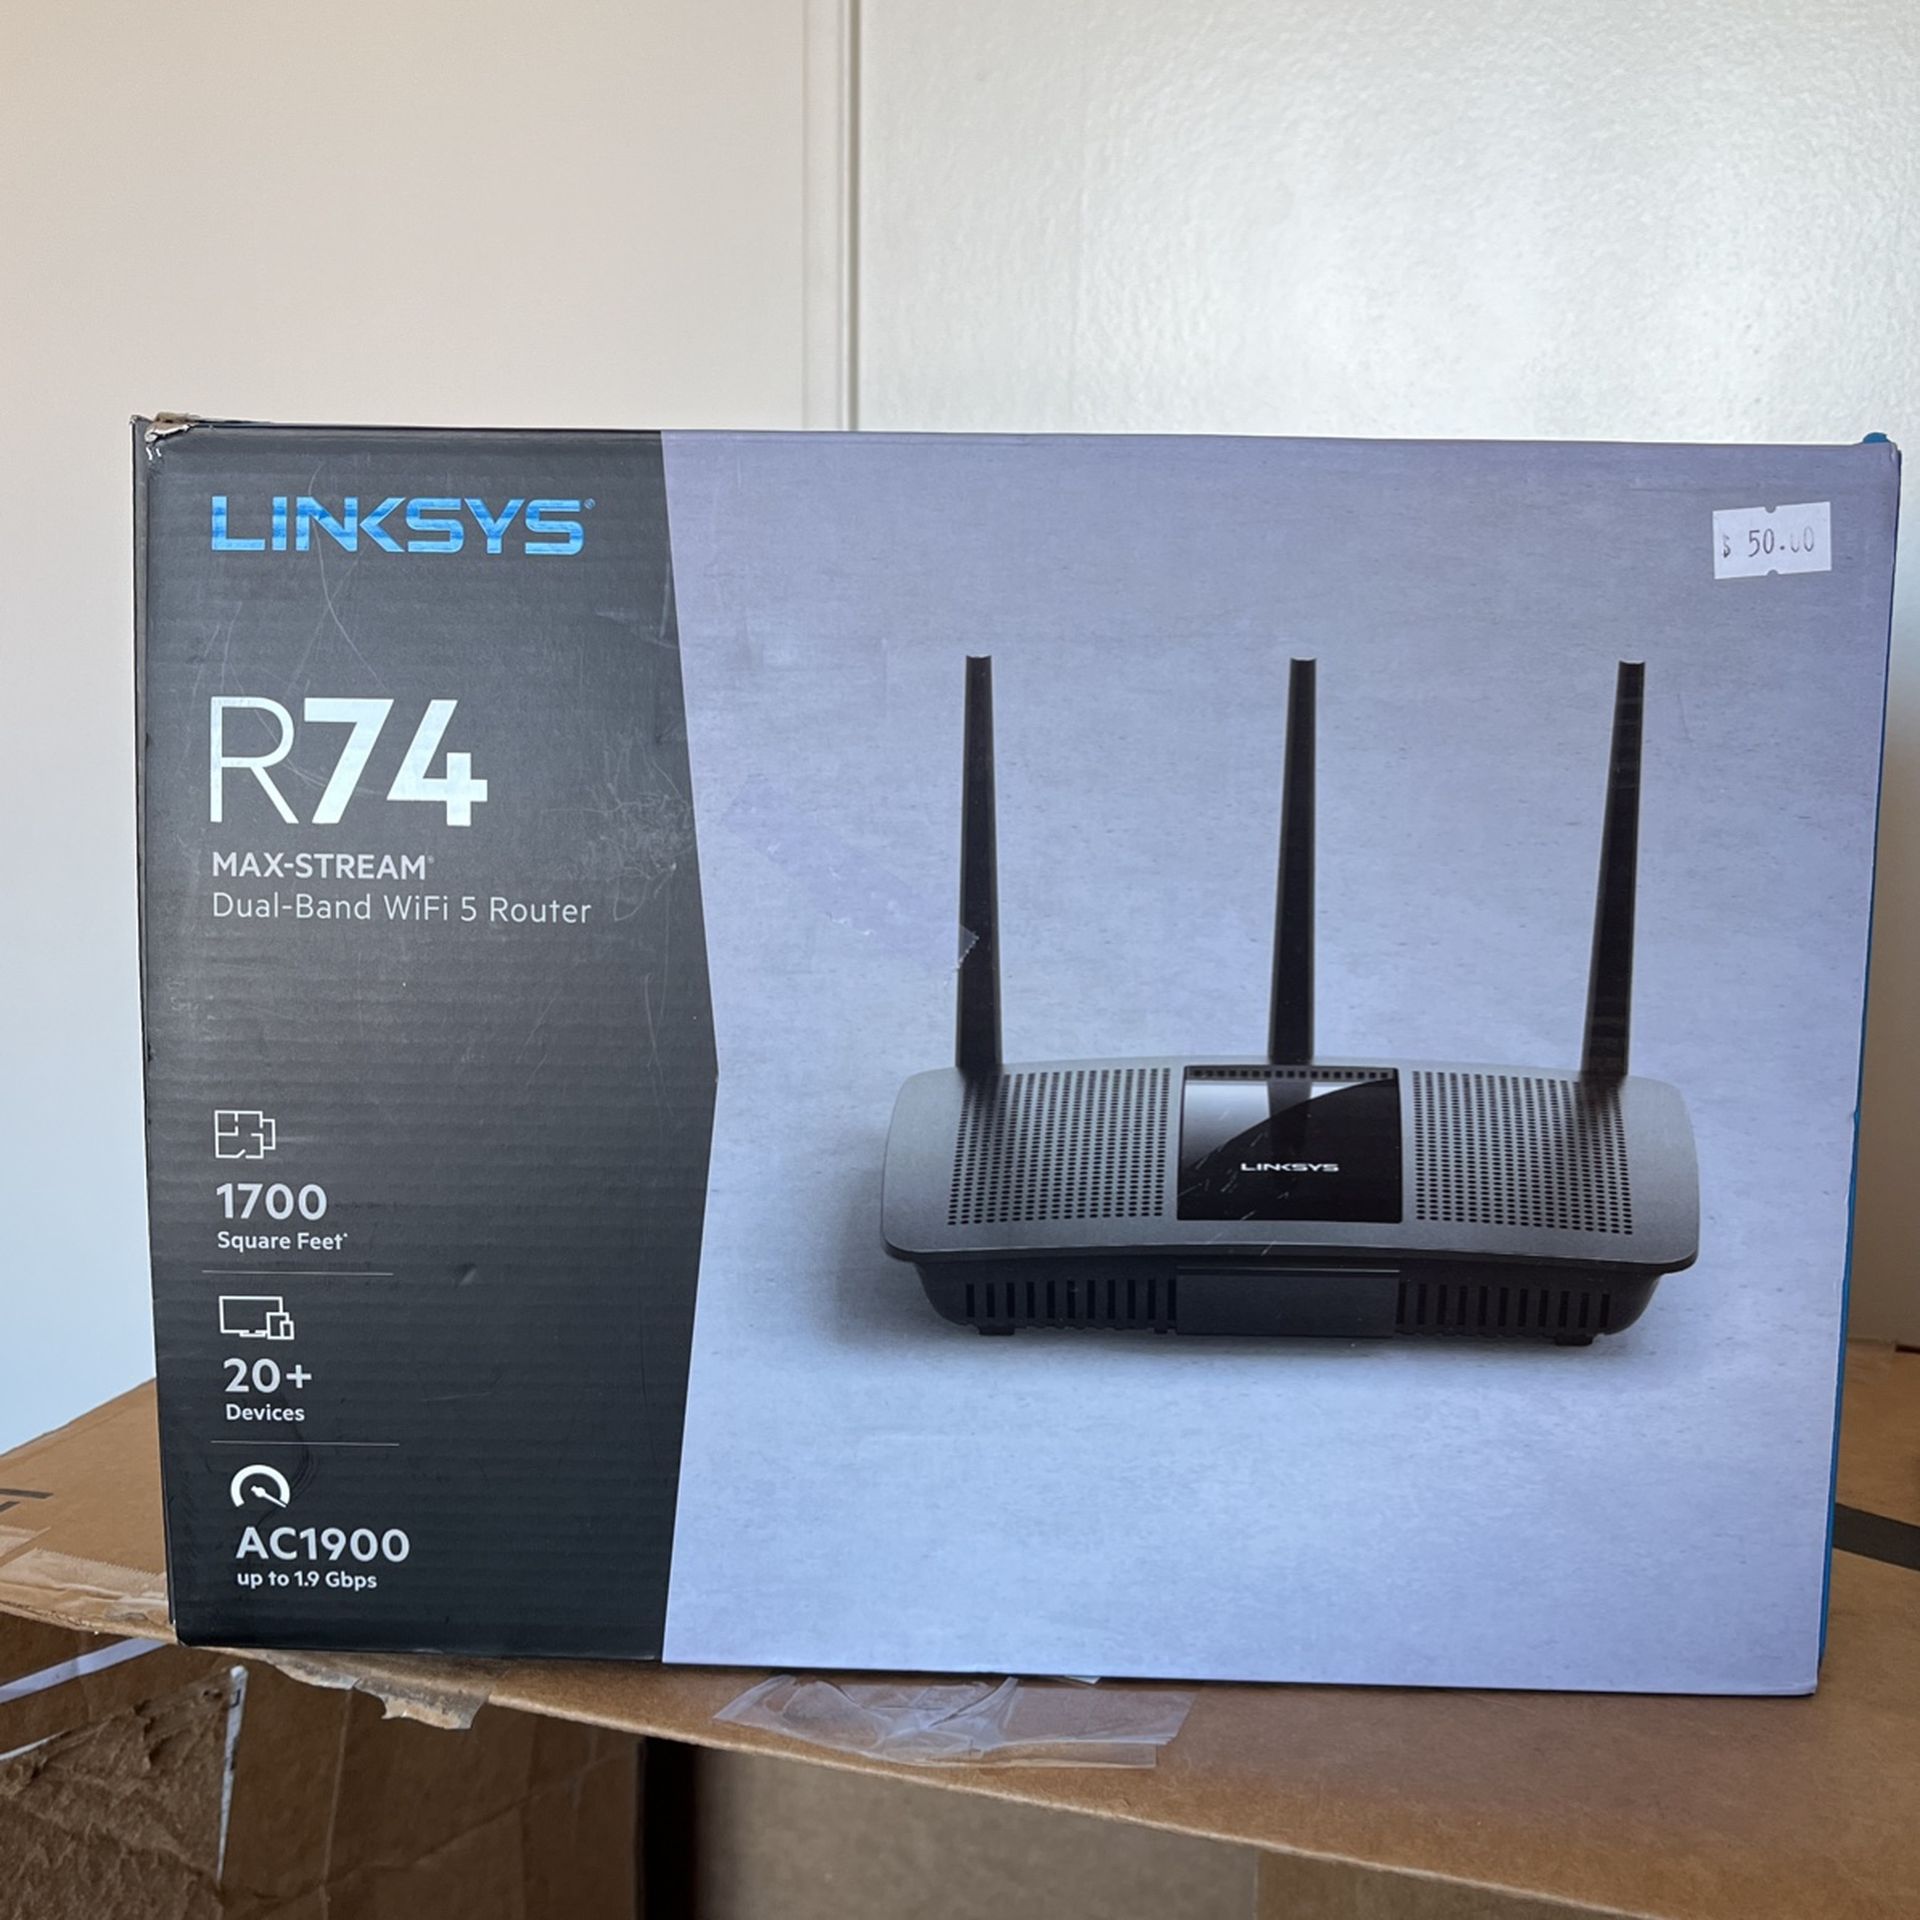 New, Linksys R74 Max Stream WiFi Router